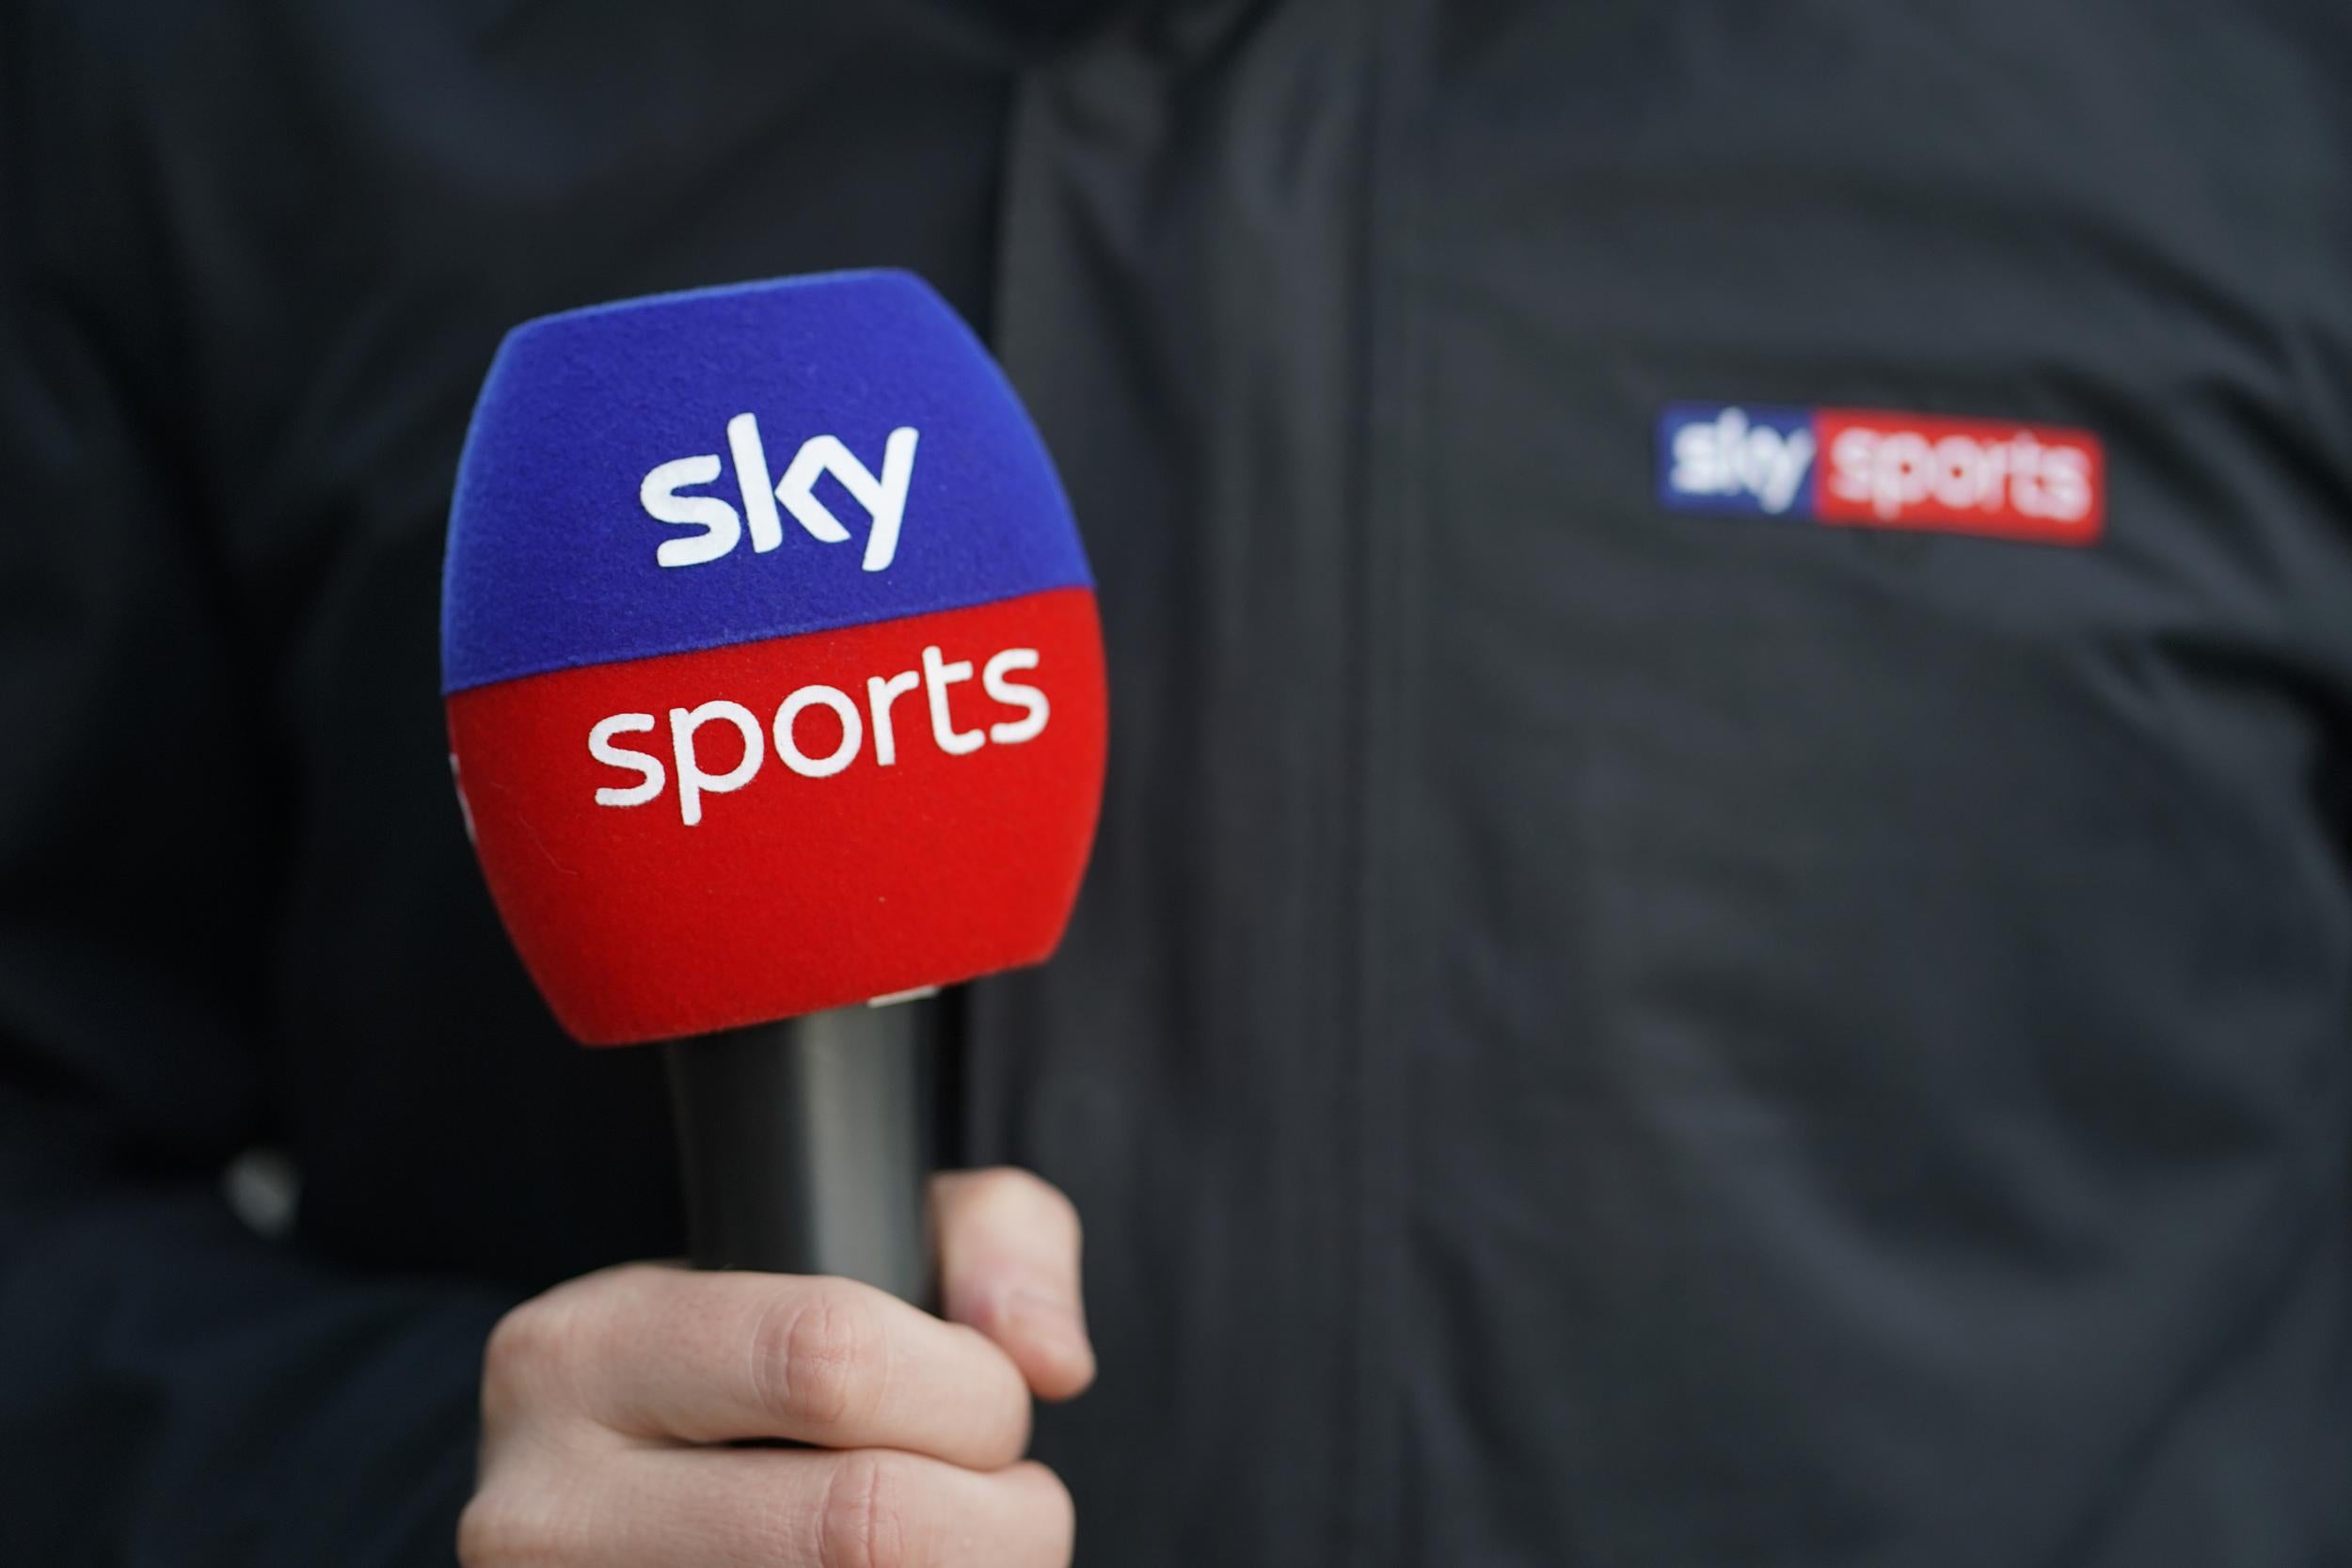 Premier League broadcasters were among those included in the study